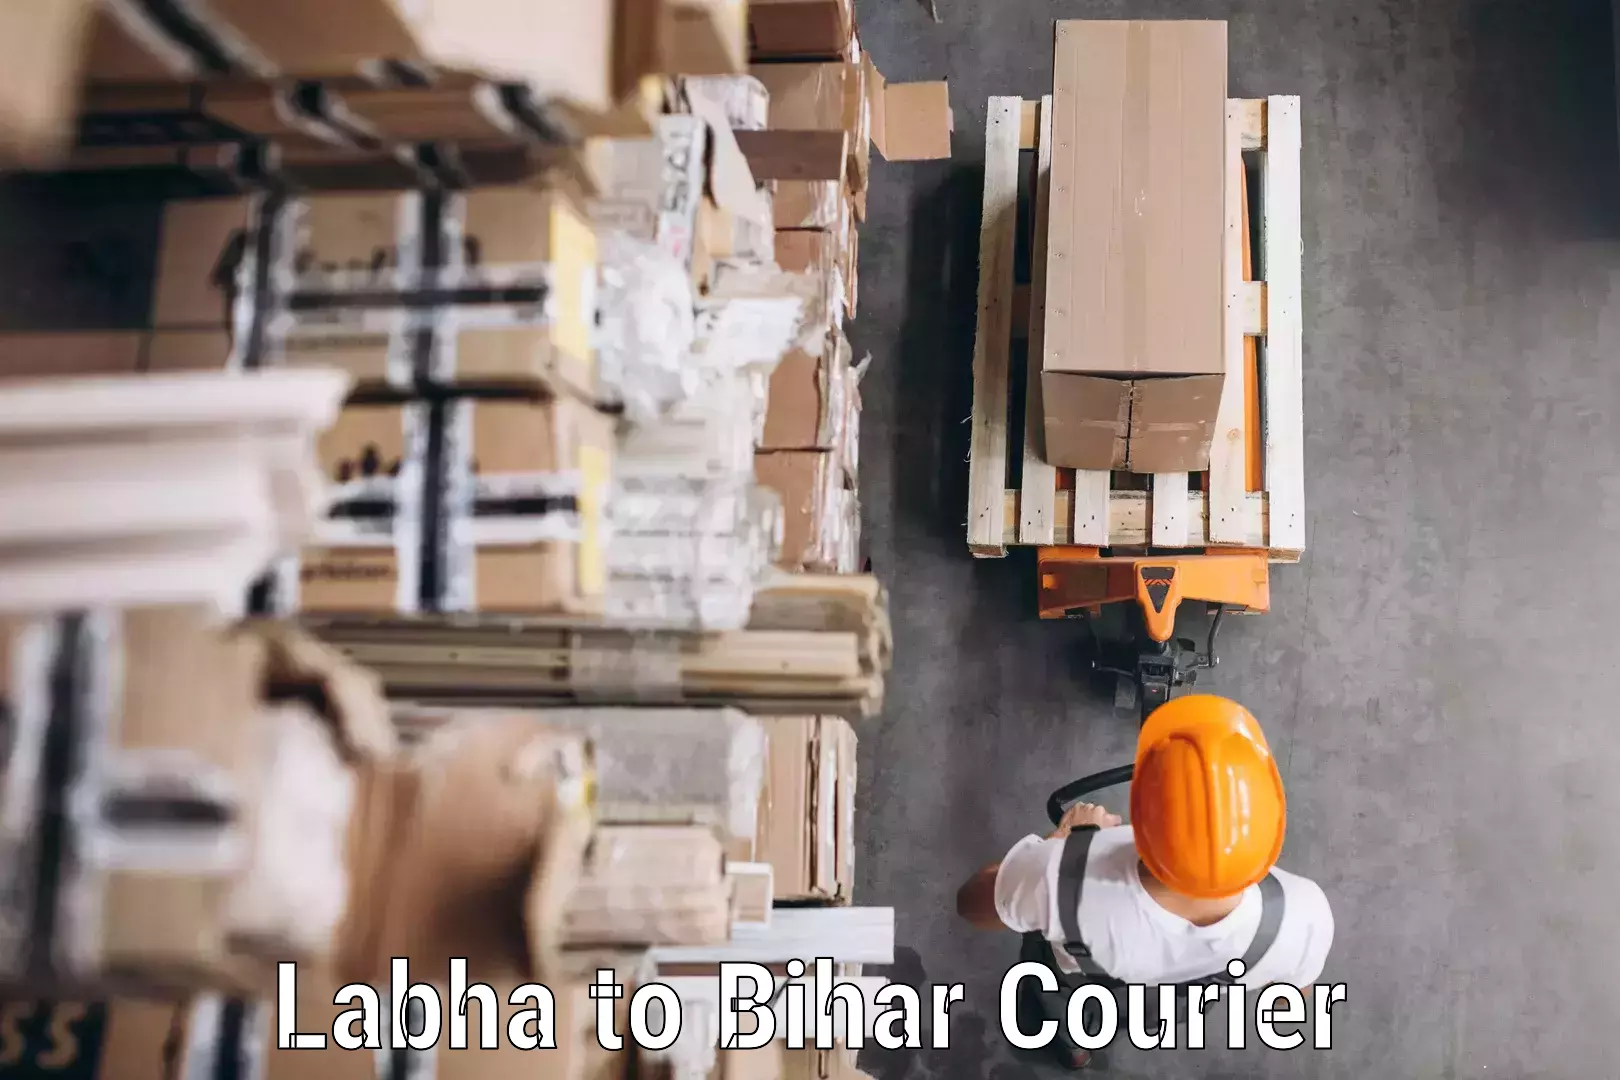 Courier service efficiency Labha to Bihar